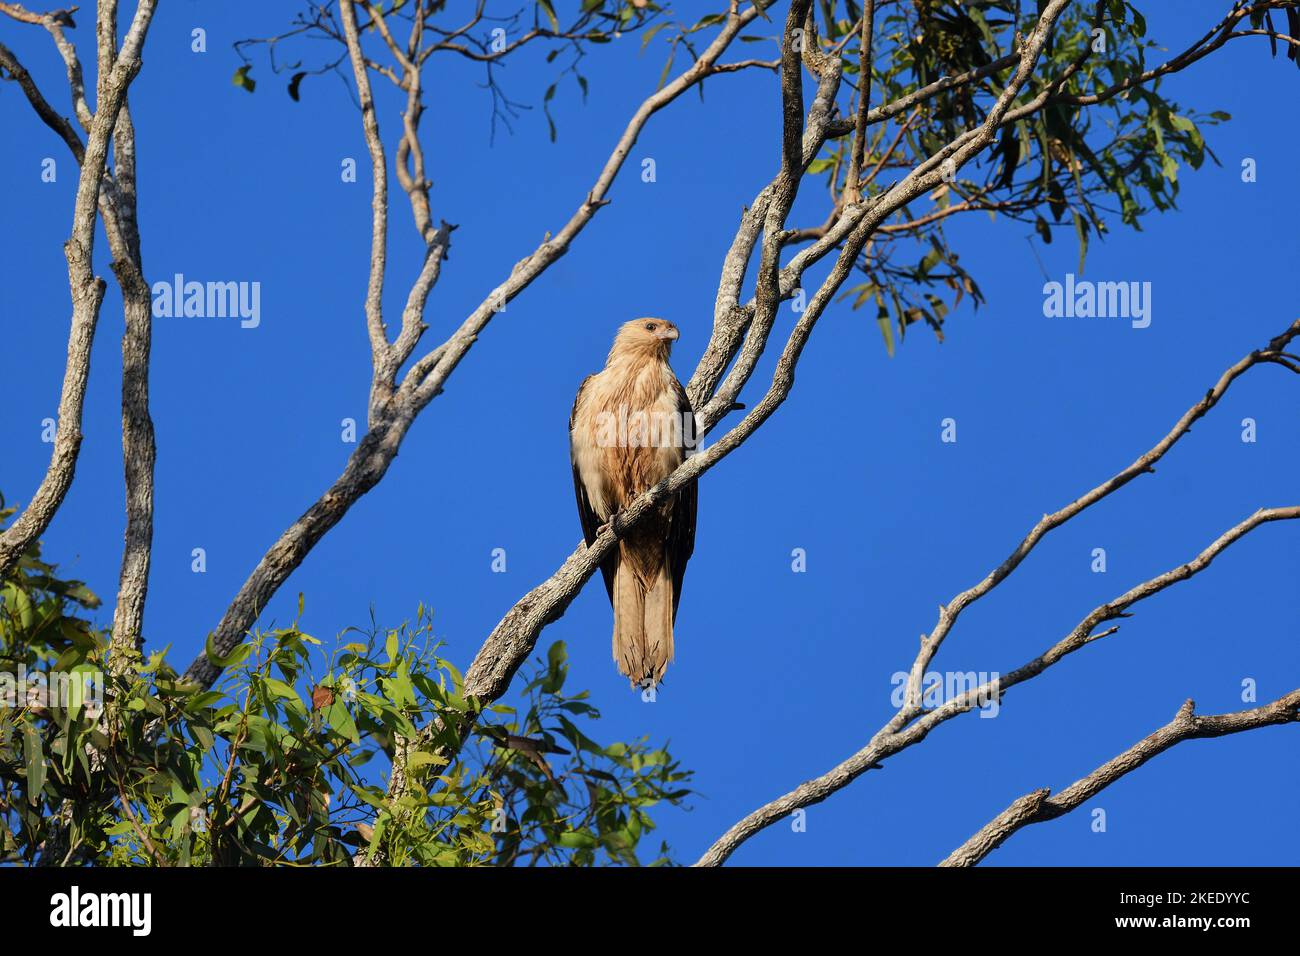 An Australian adult Whistling Kite -Haliastur sphenurus- bird perched high up on a tree branch in morning light looking for potential prey Stock Photo